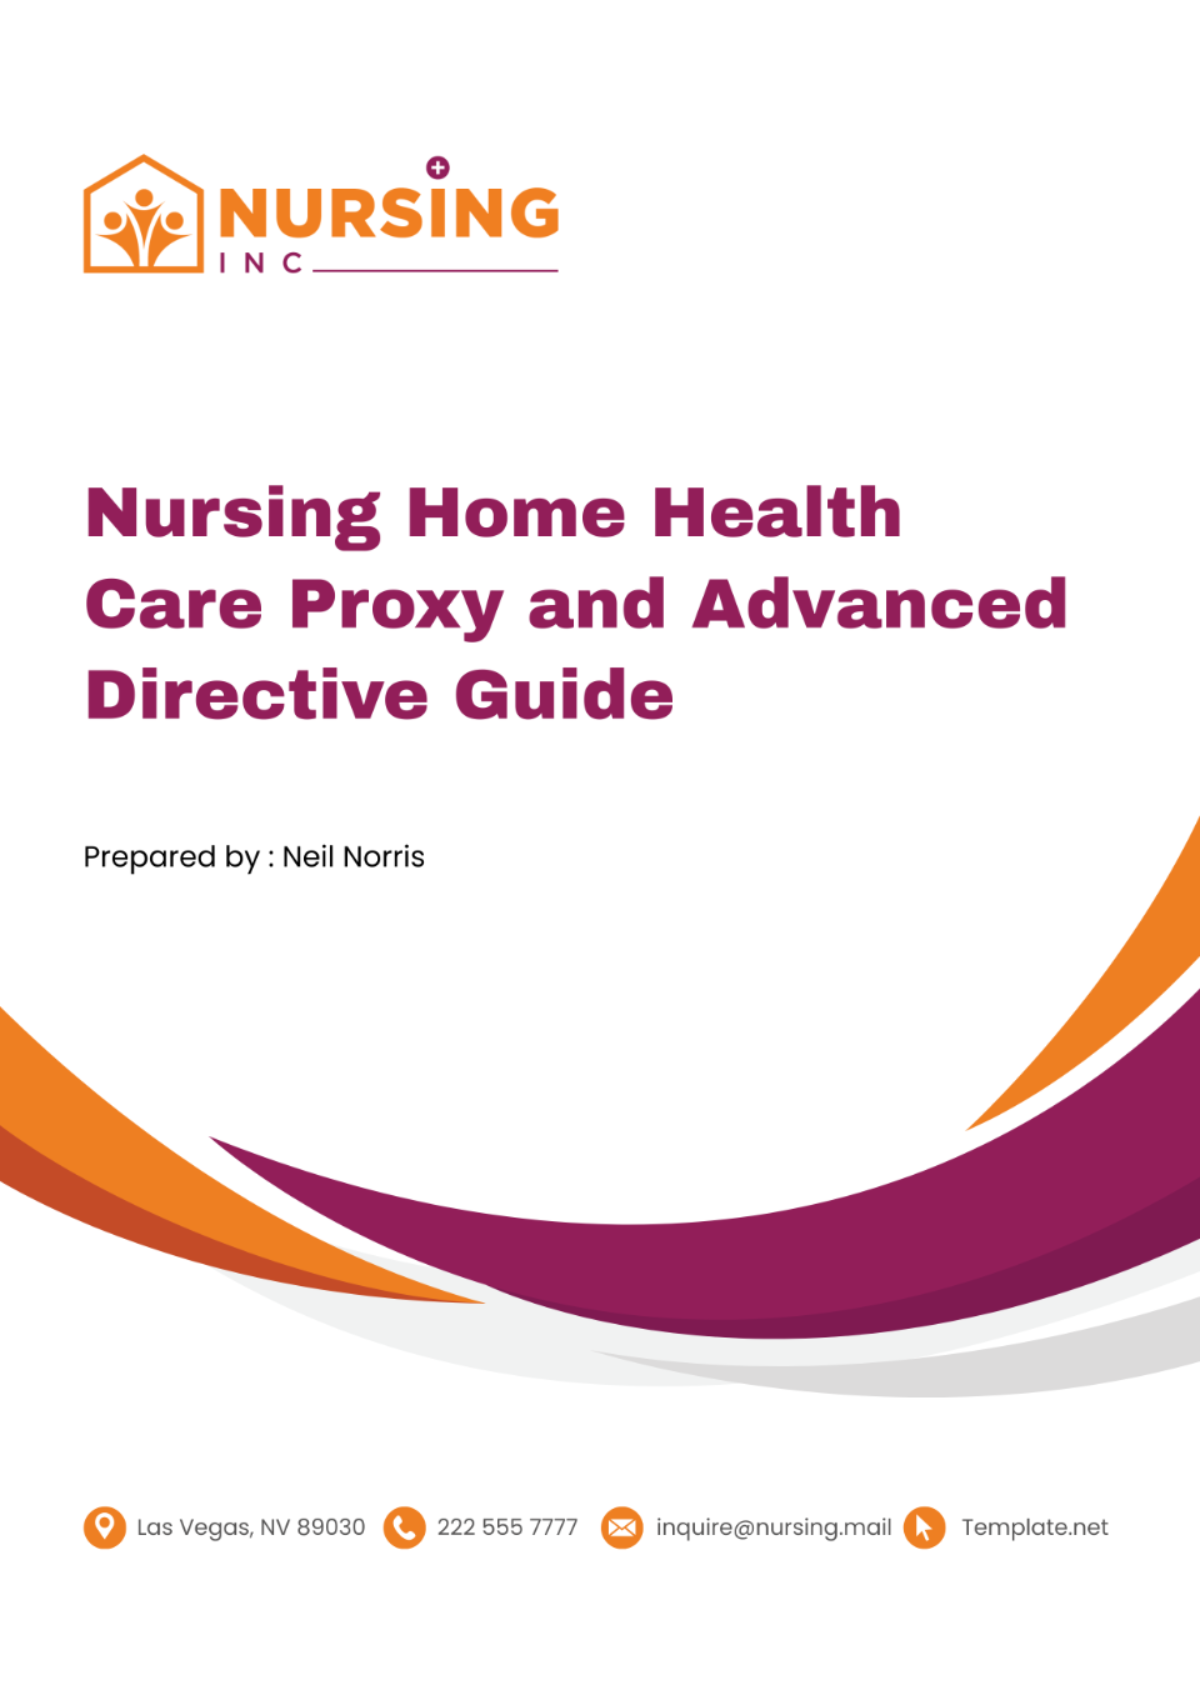 Free Nursing Home Health Care Proxy and Advanced Directive Guide Template